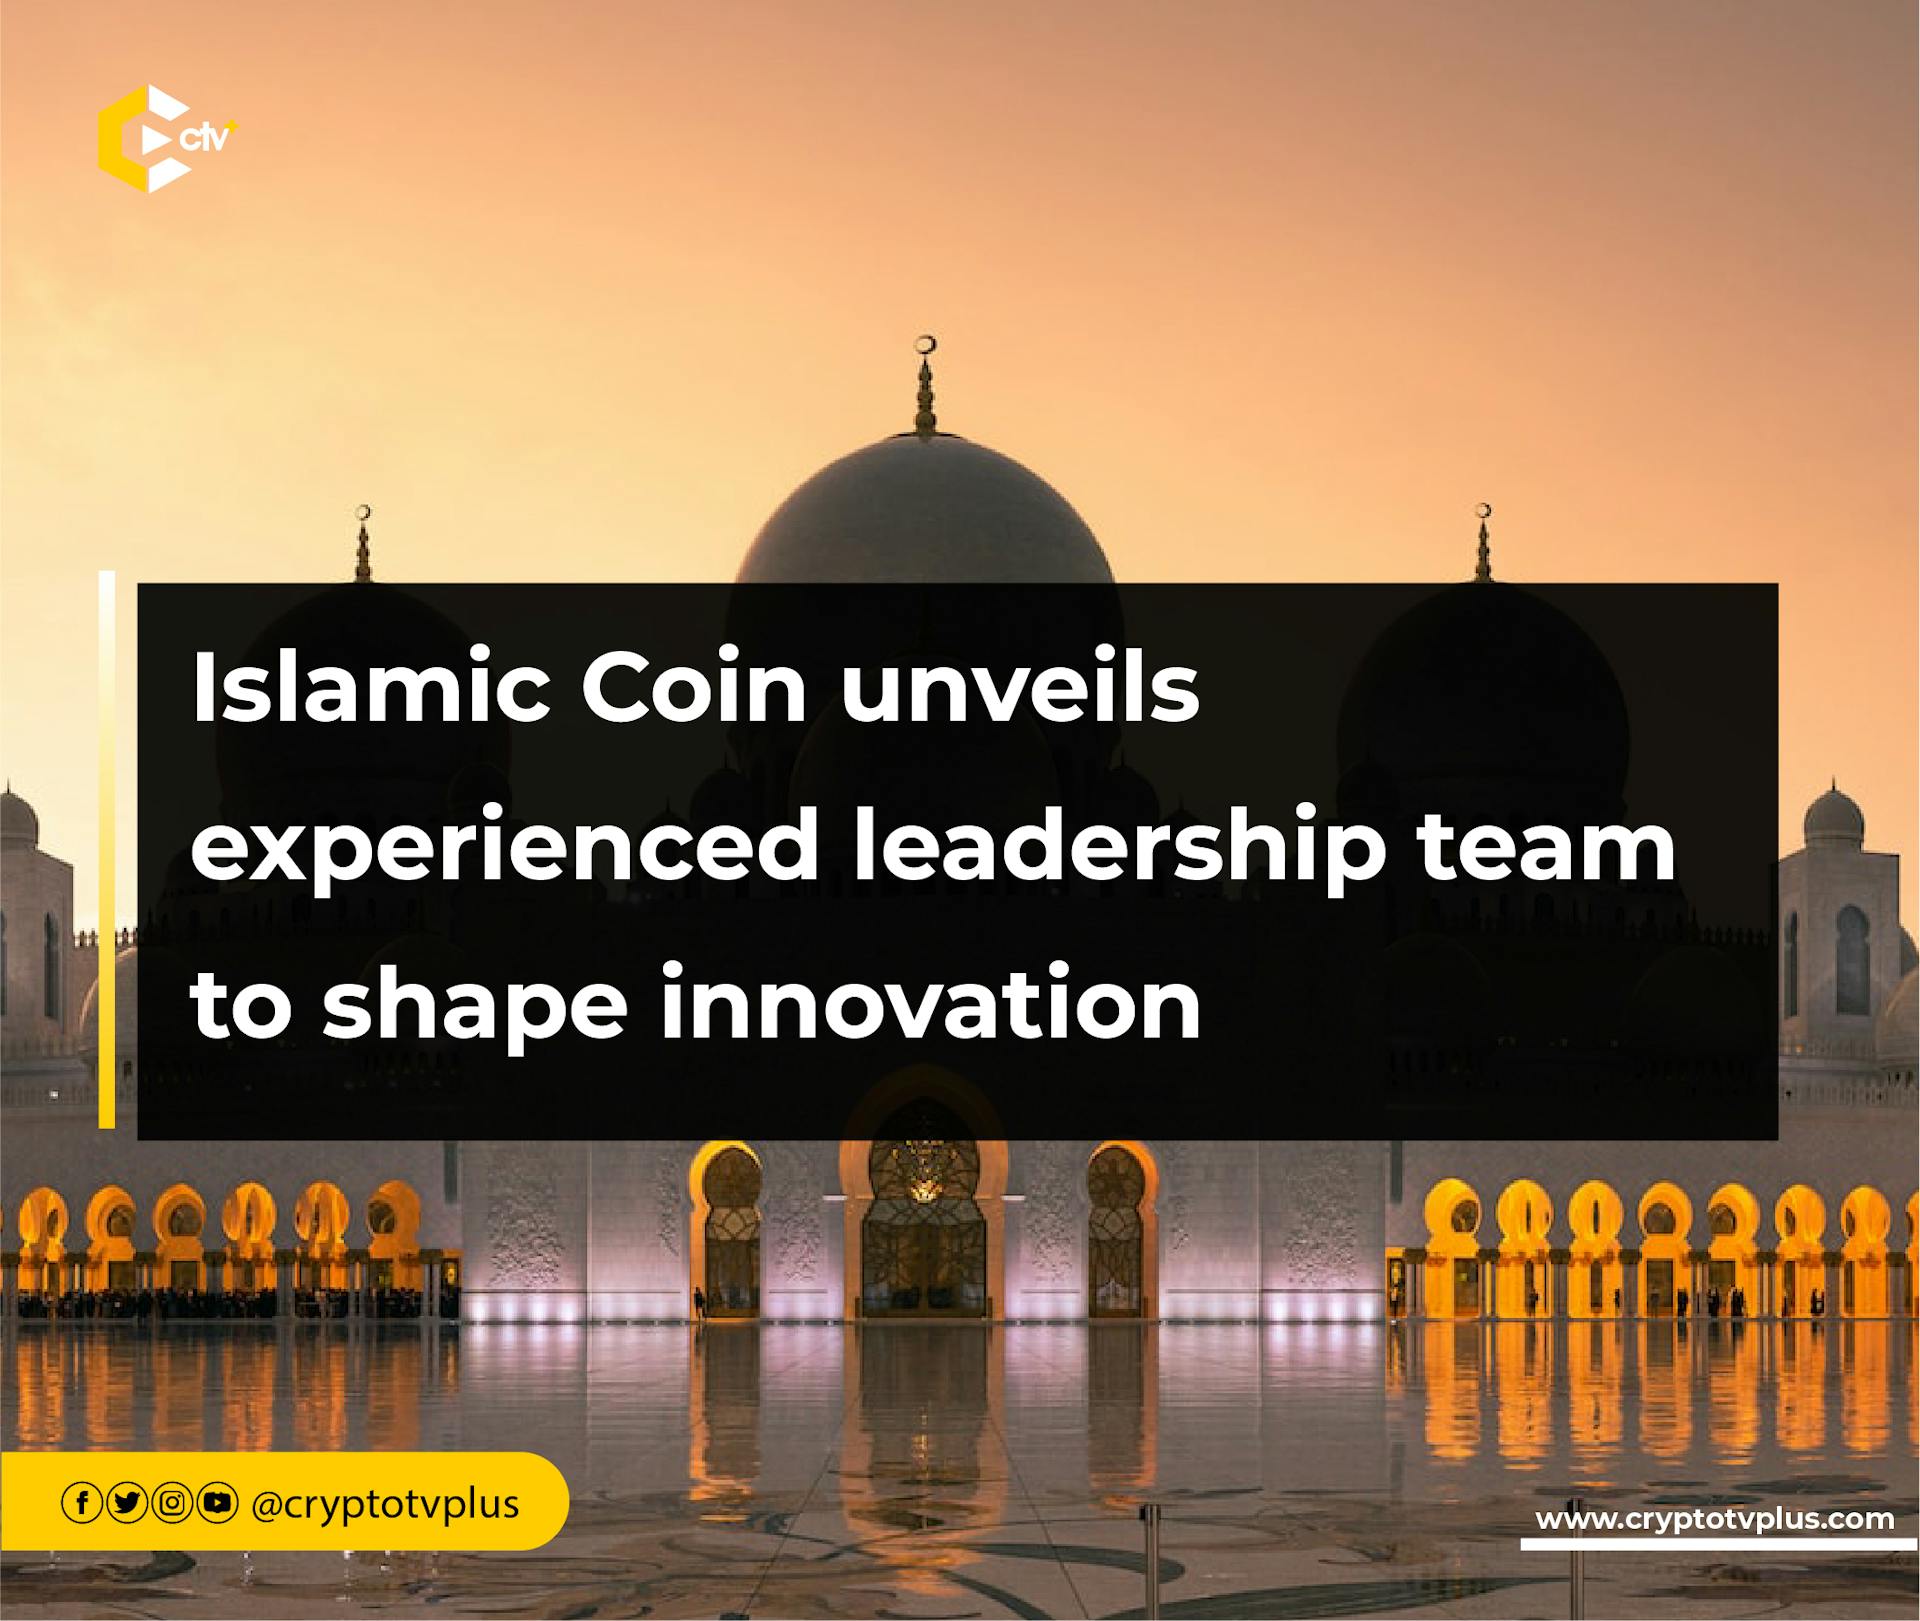 Islamic Coin: faces behind the project